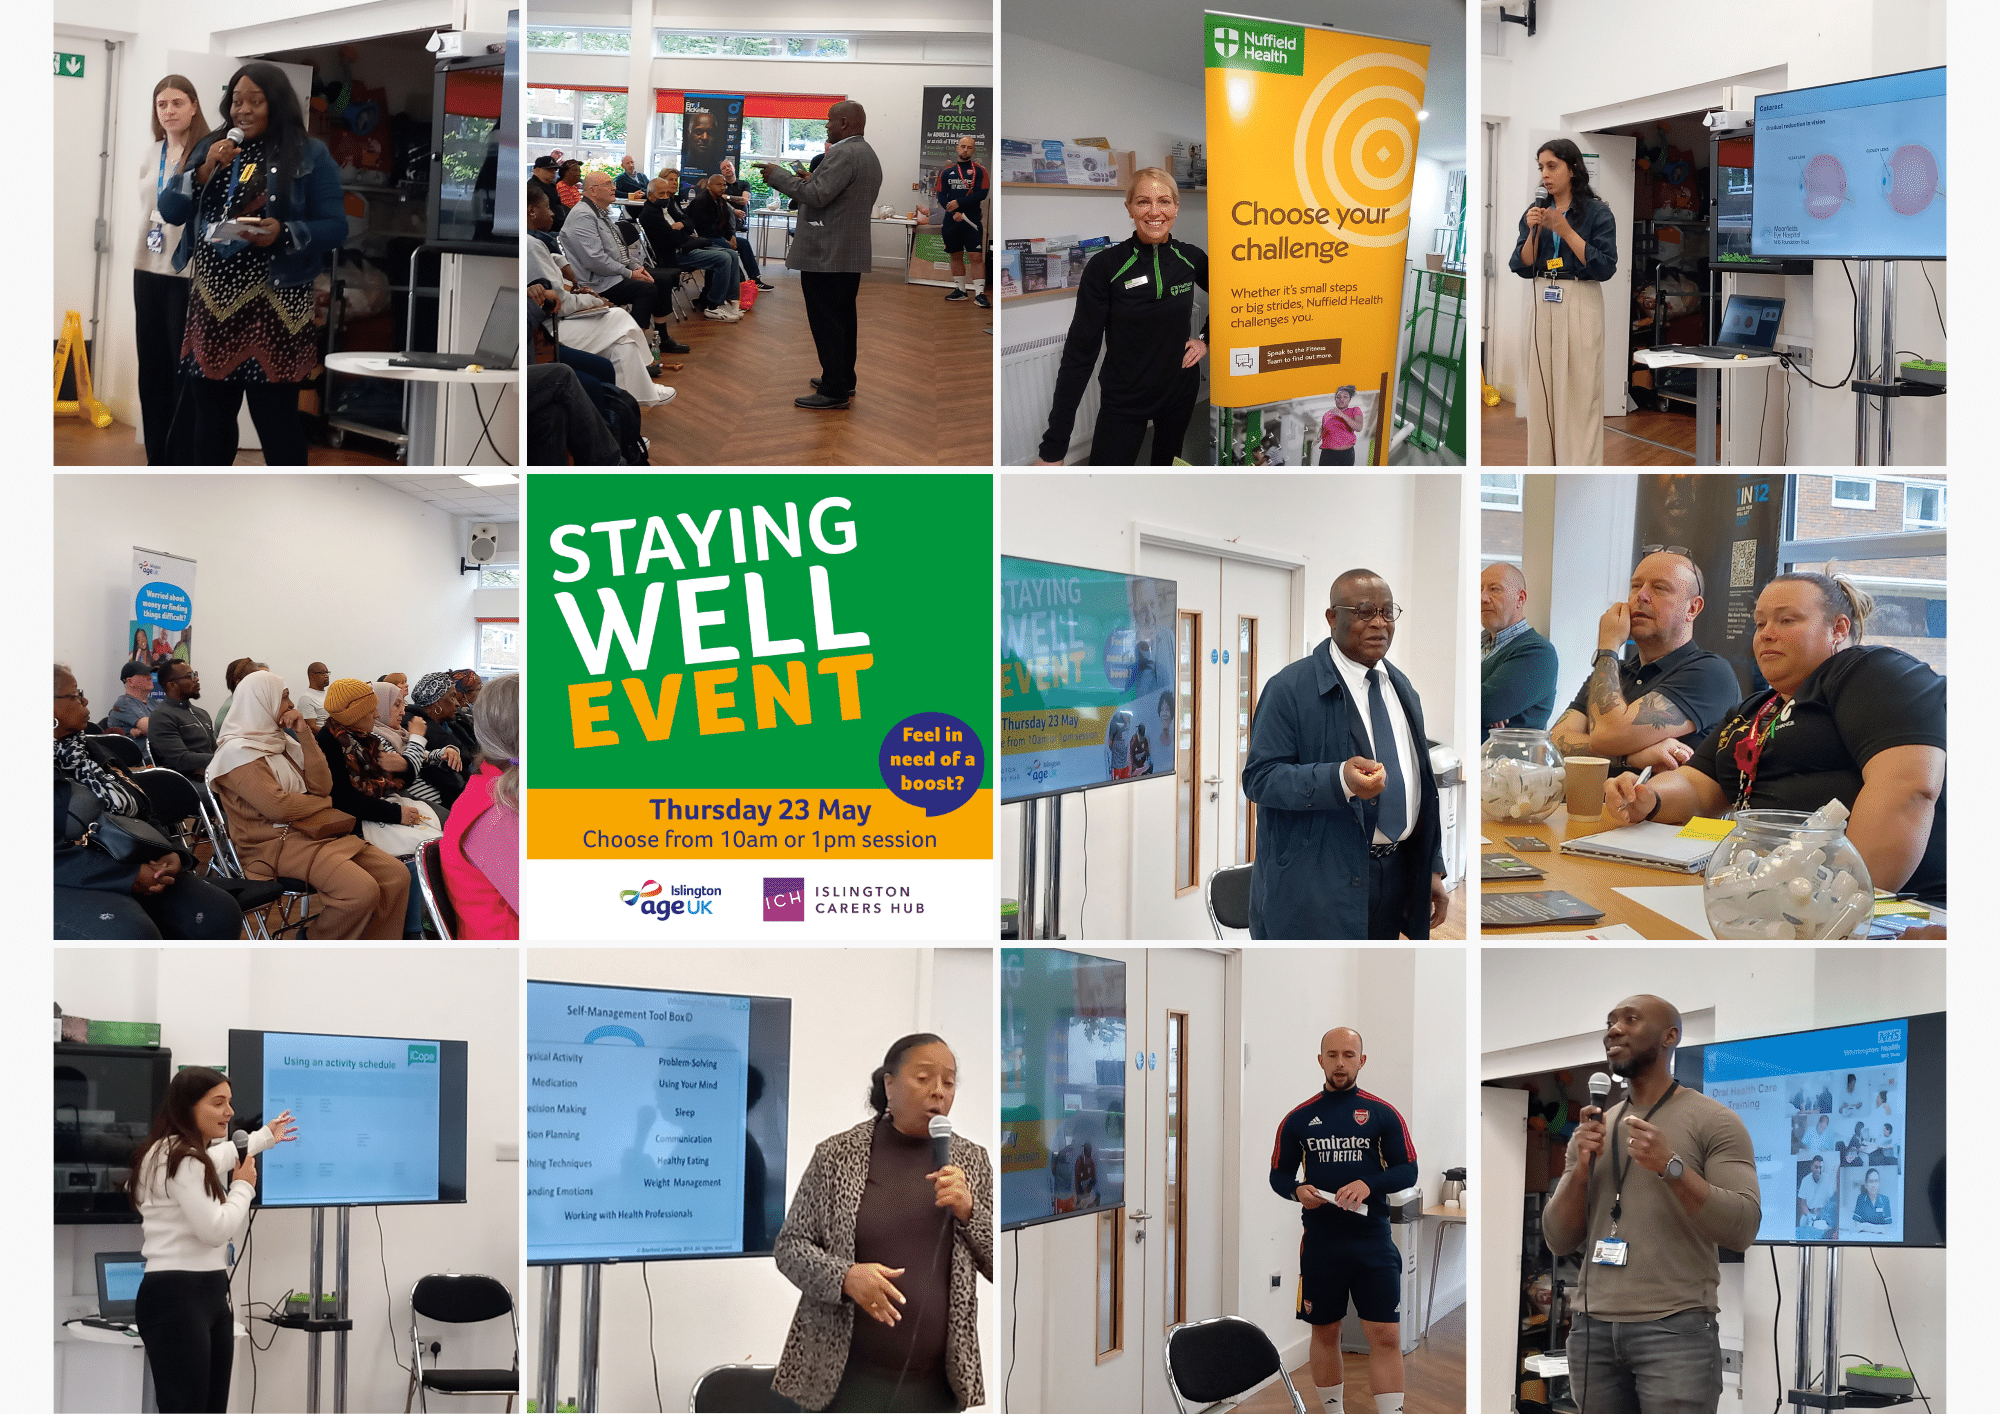 Collage of photos from Staying Well event showing talks and audience listening